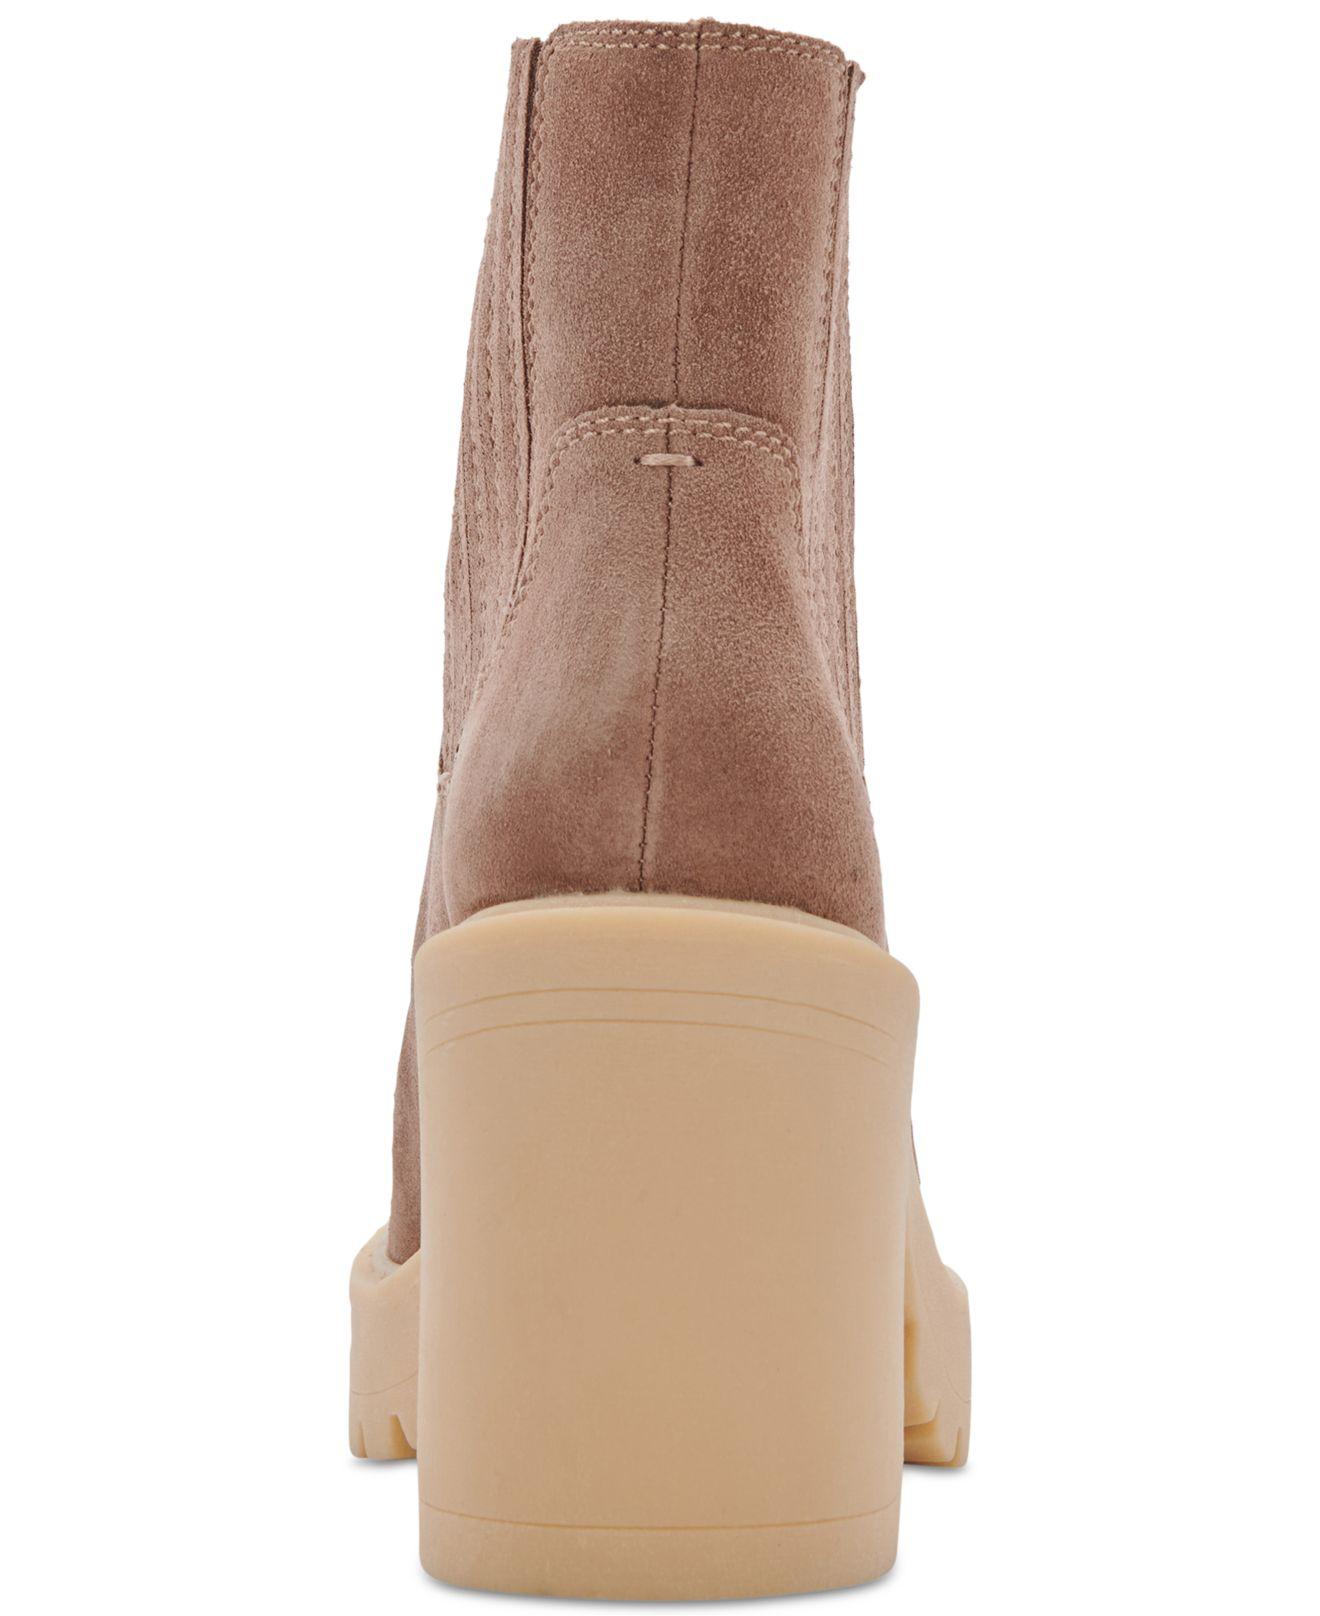 Dolce Vita Caster H2o Cheslea Booties in Brown | Lyst